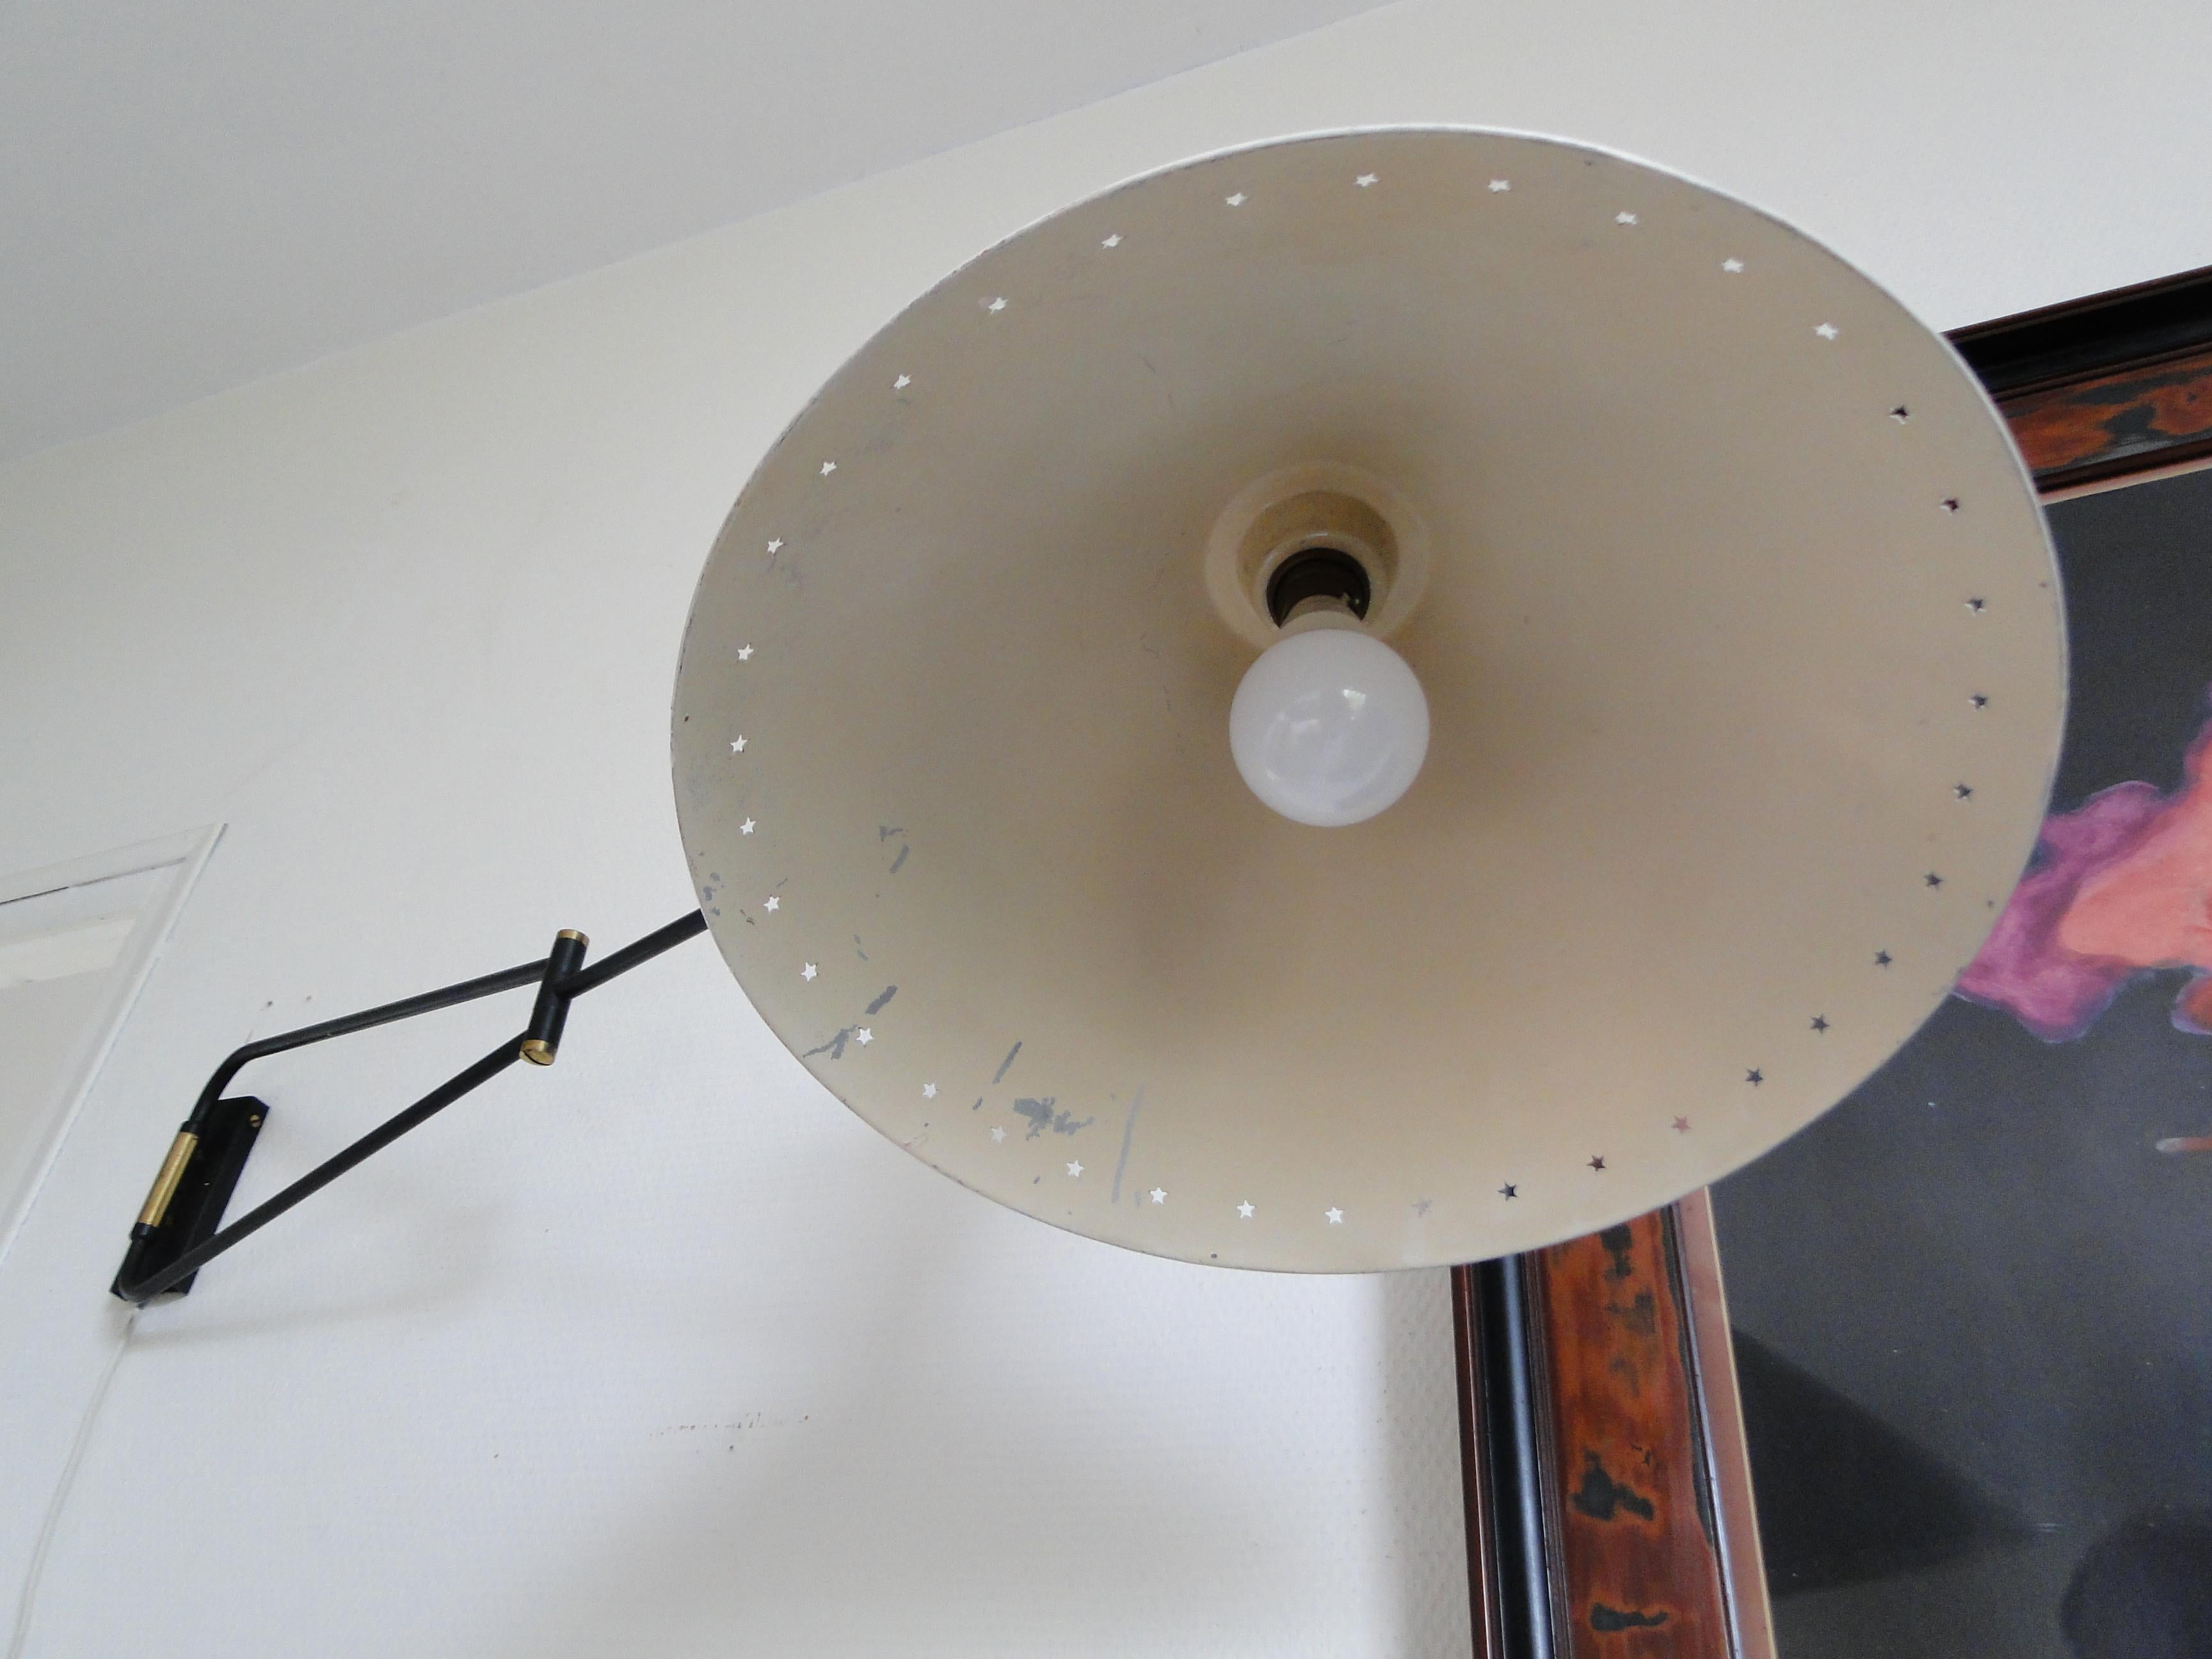 20th Century Large Vintage 1950s Double Arms Adjustable Diabolo Wall Lamp Rene Mathieu France